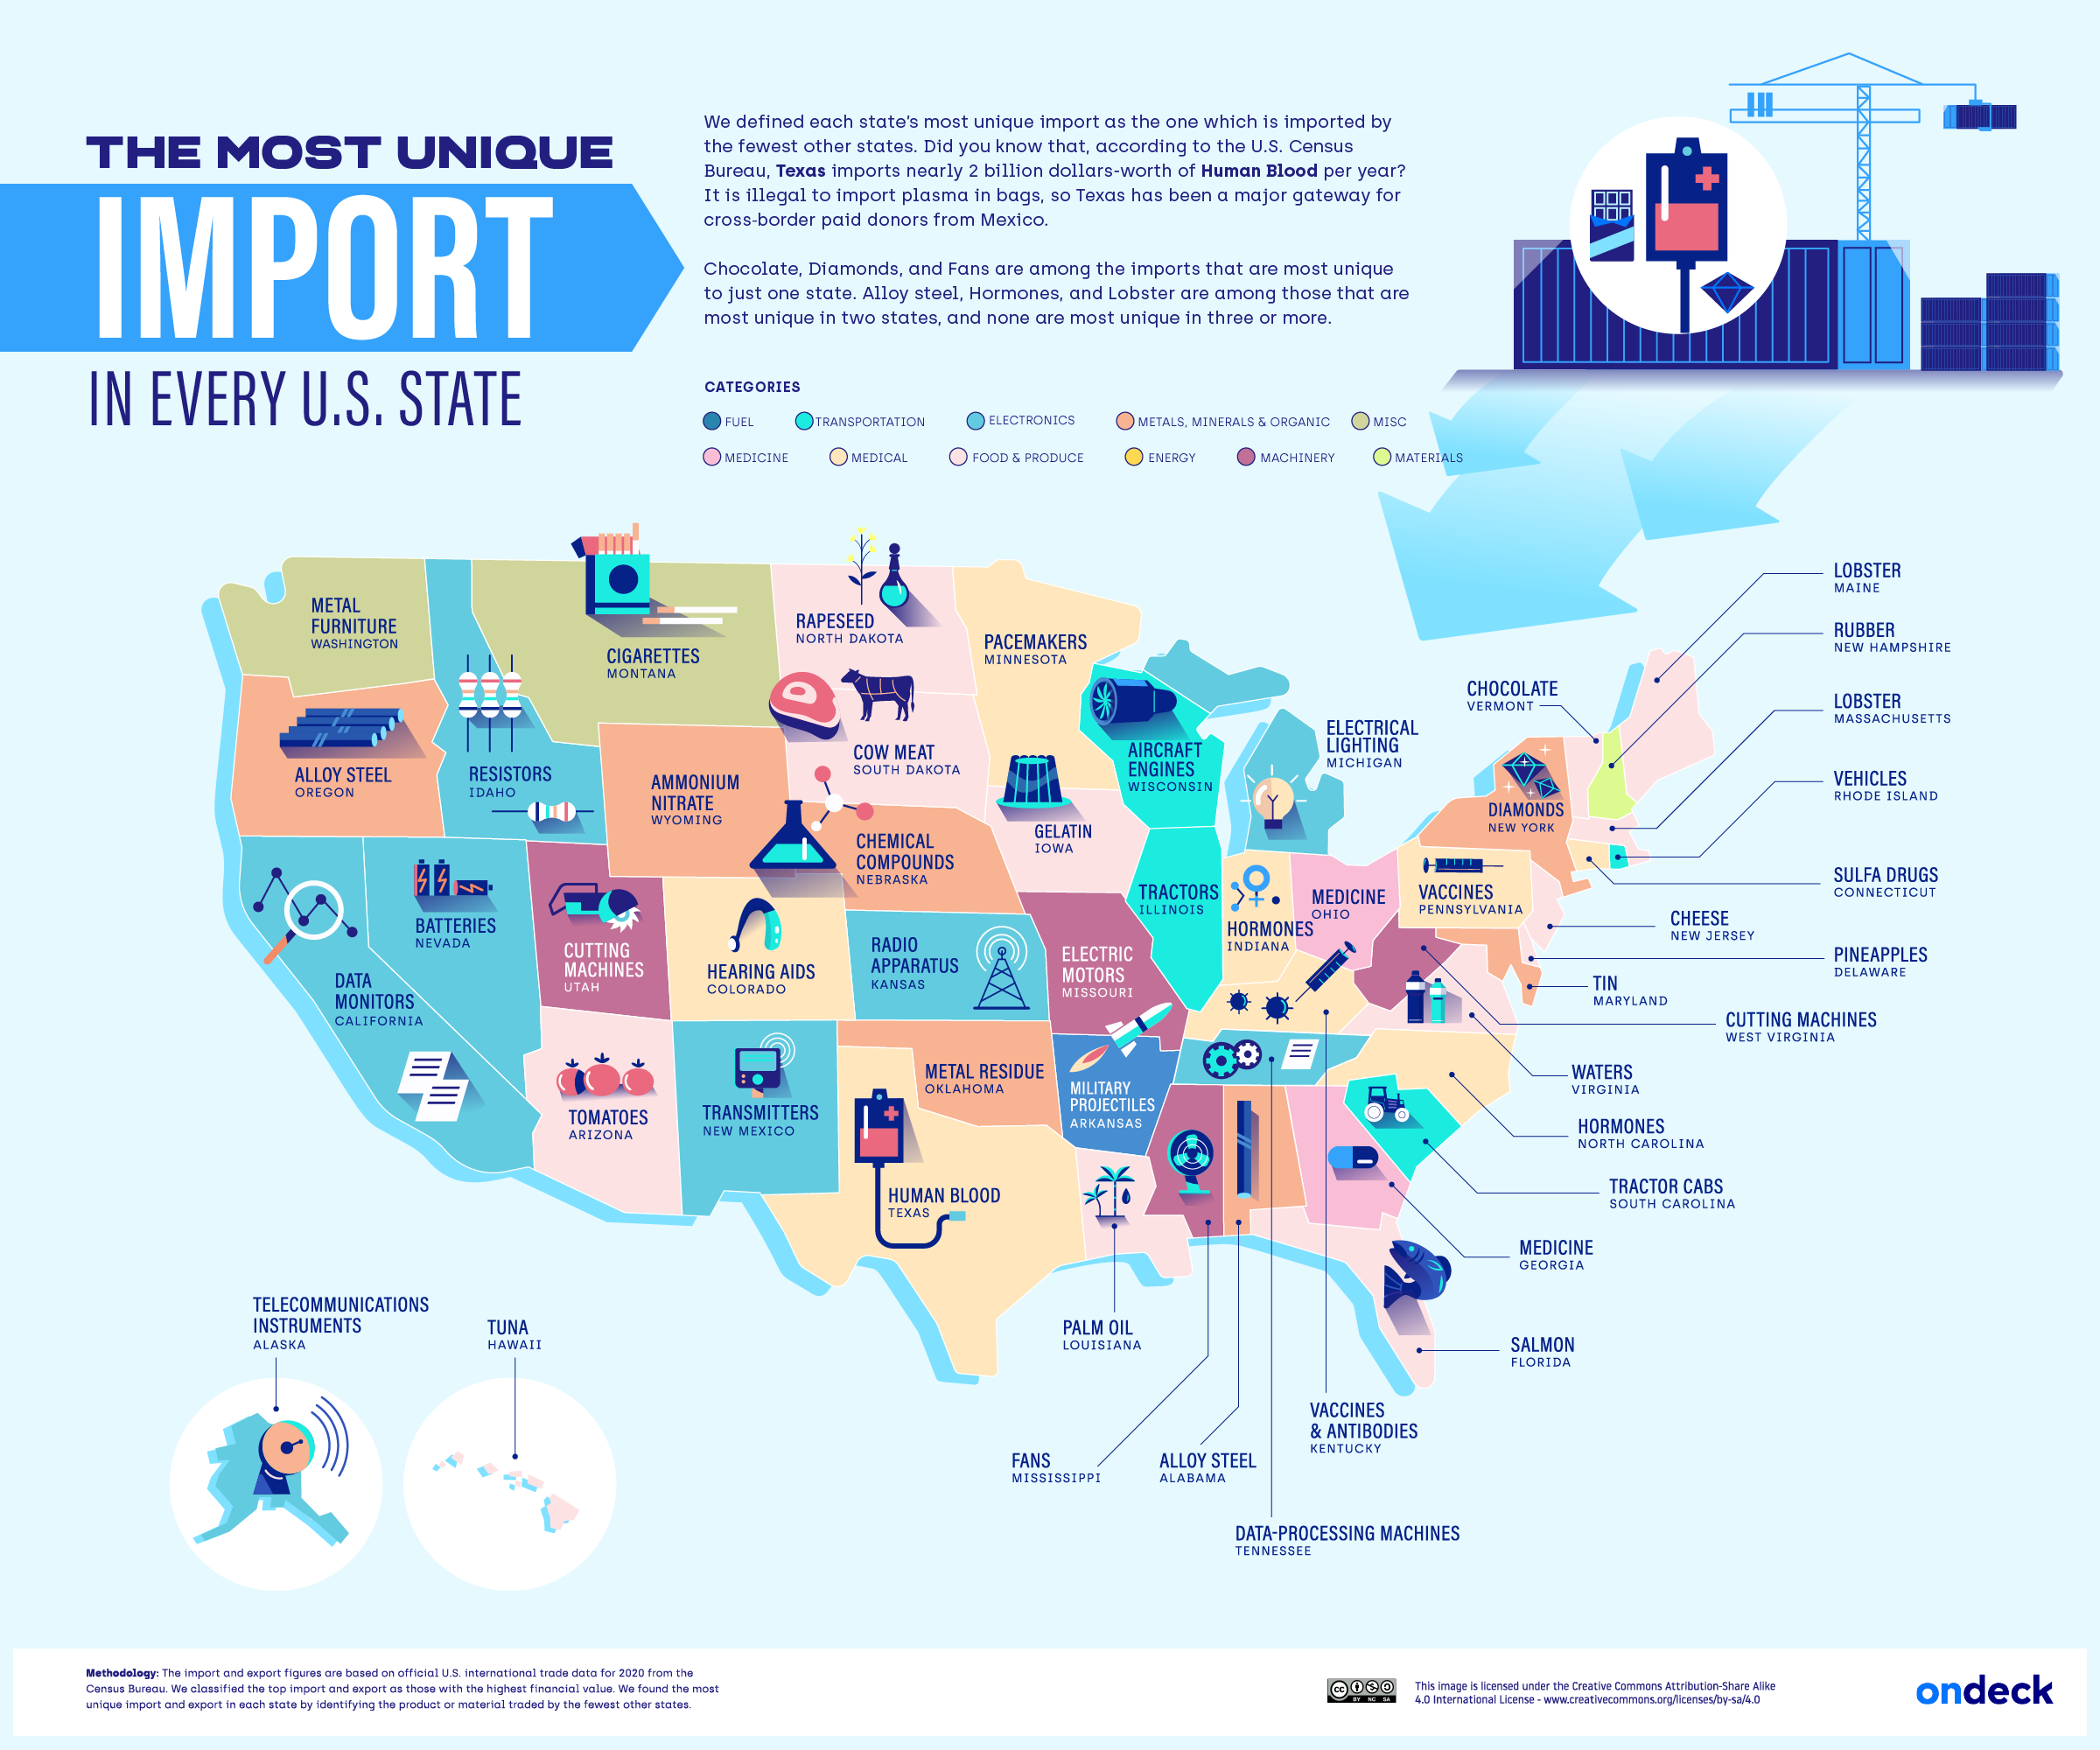 Map of the most unique import in each U.S. state